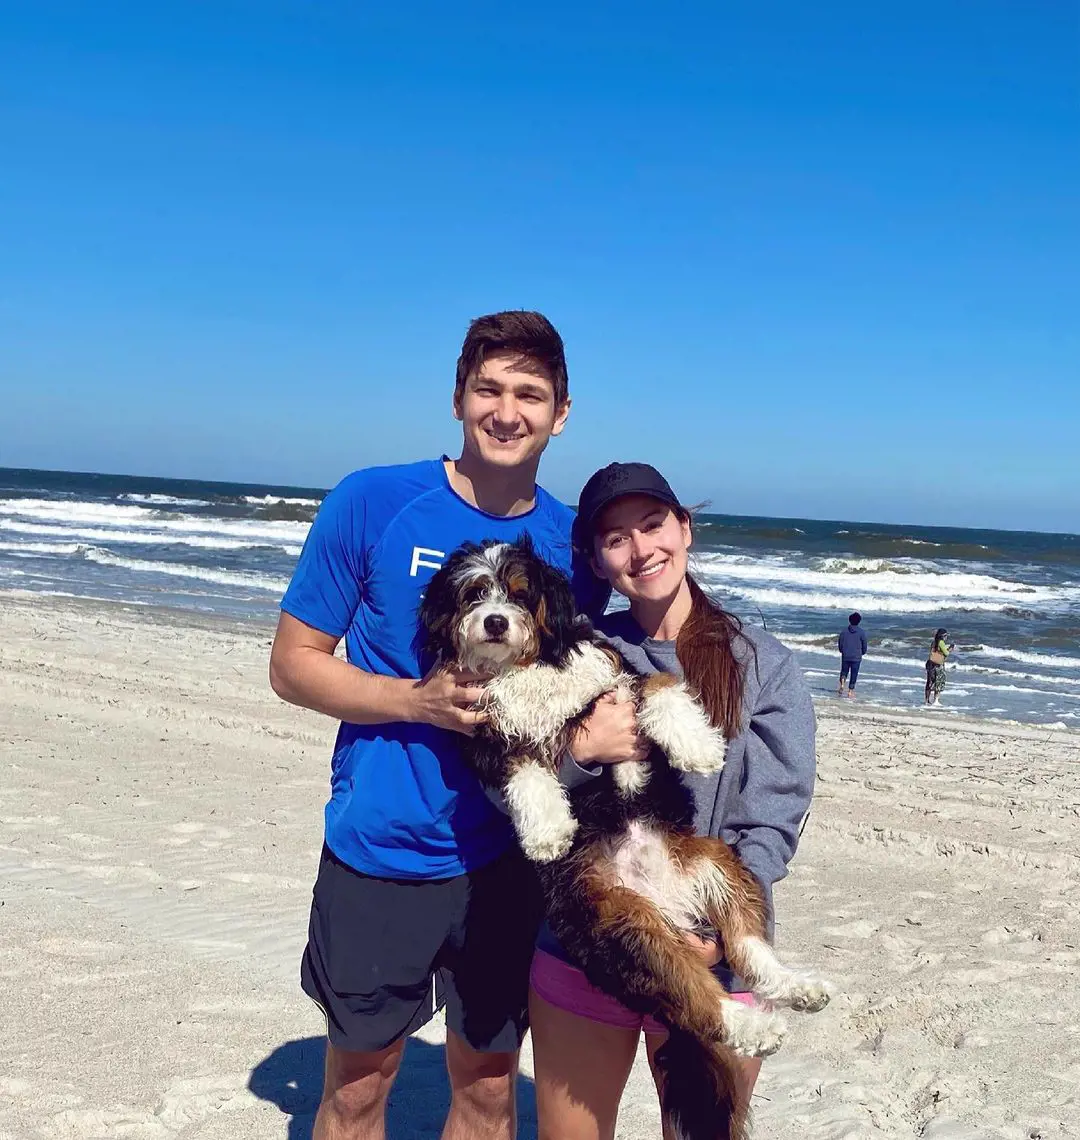 Grayson and Morgan carrying their dog on a trip to the beach in March 2021